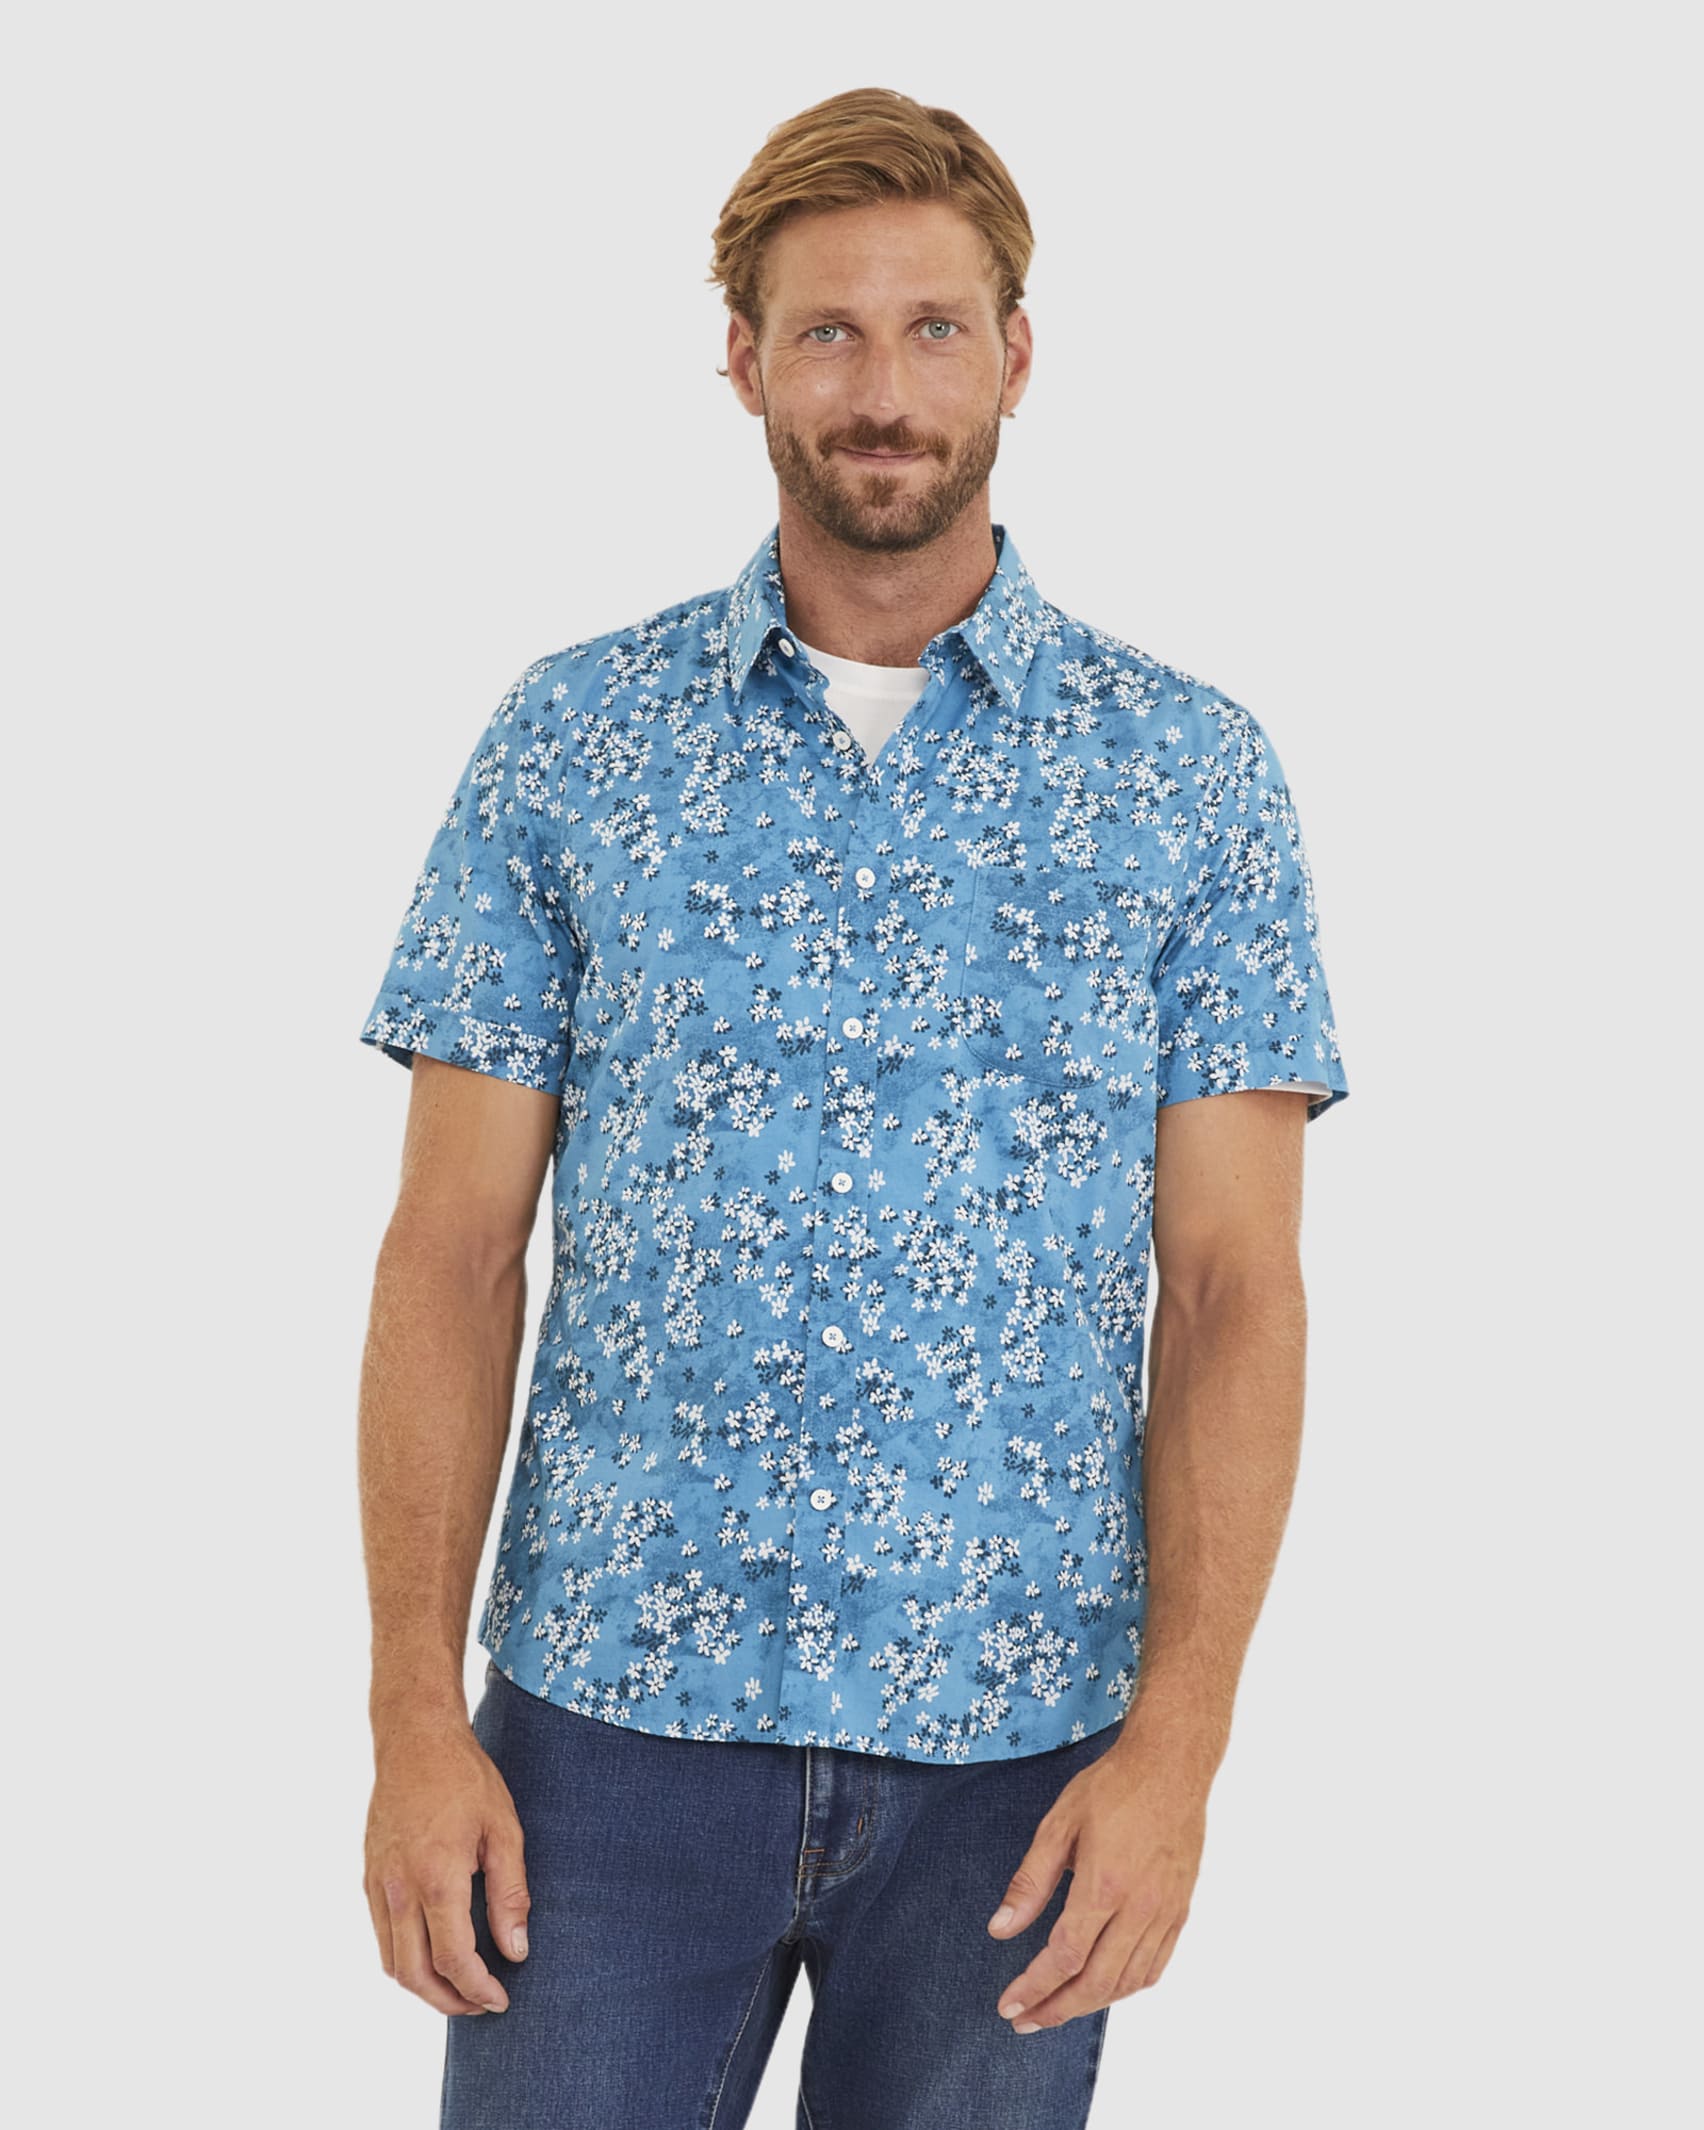 Paits Tapered Shirt in MOUNTAIN BLUE